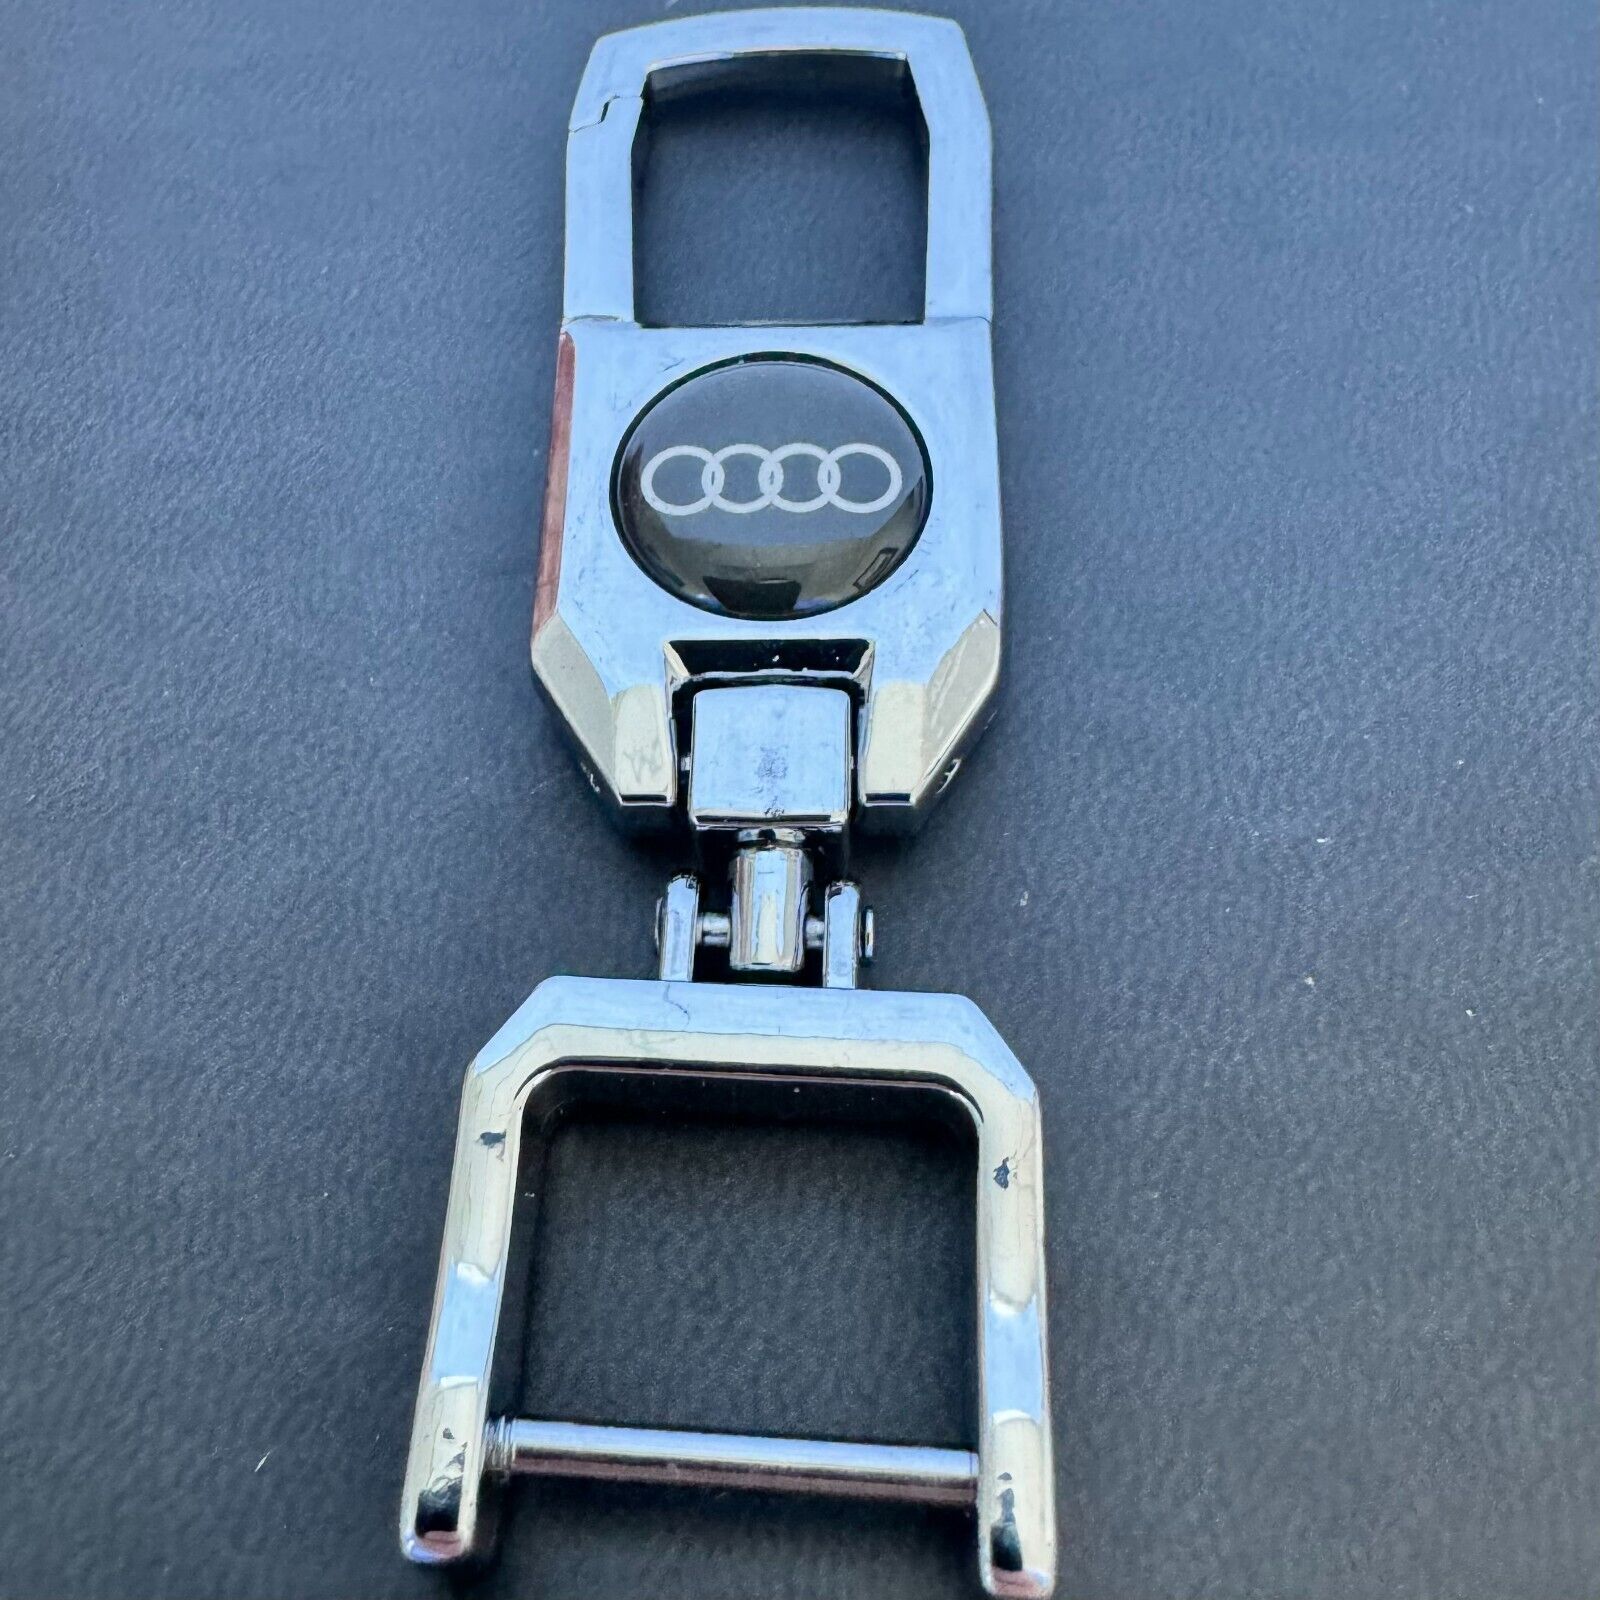 Audi Double-Ended Keychain, Carabiner on One End, Bolt on the Other 